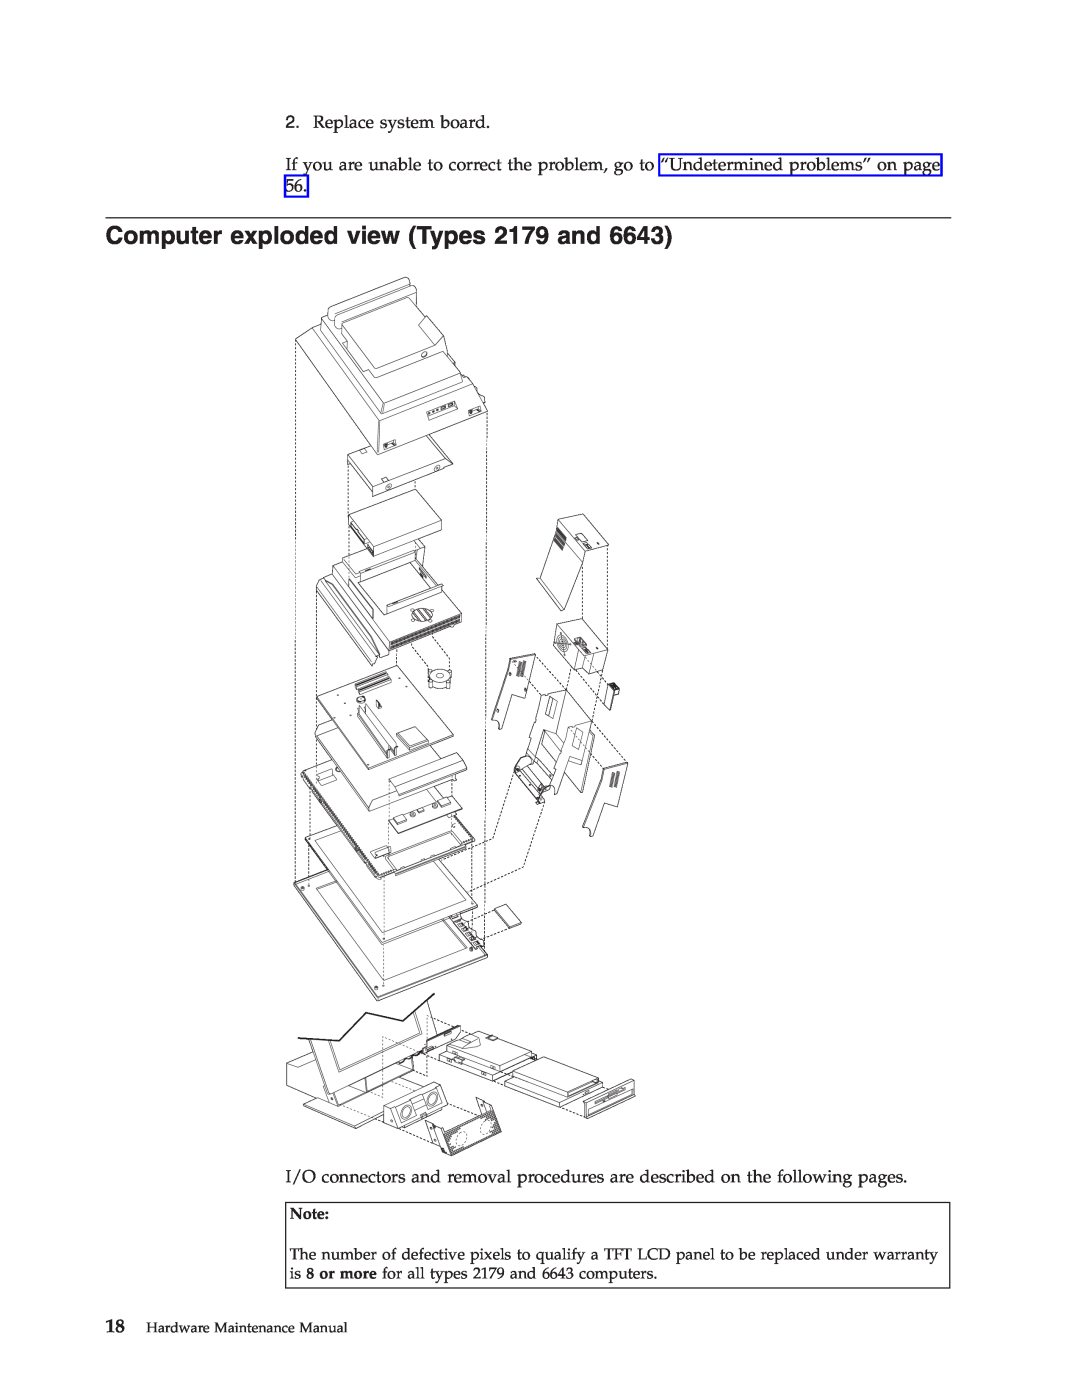 IBM 6643 manual Computer exploded view Types 2179 and 